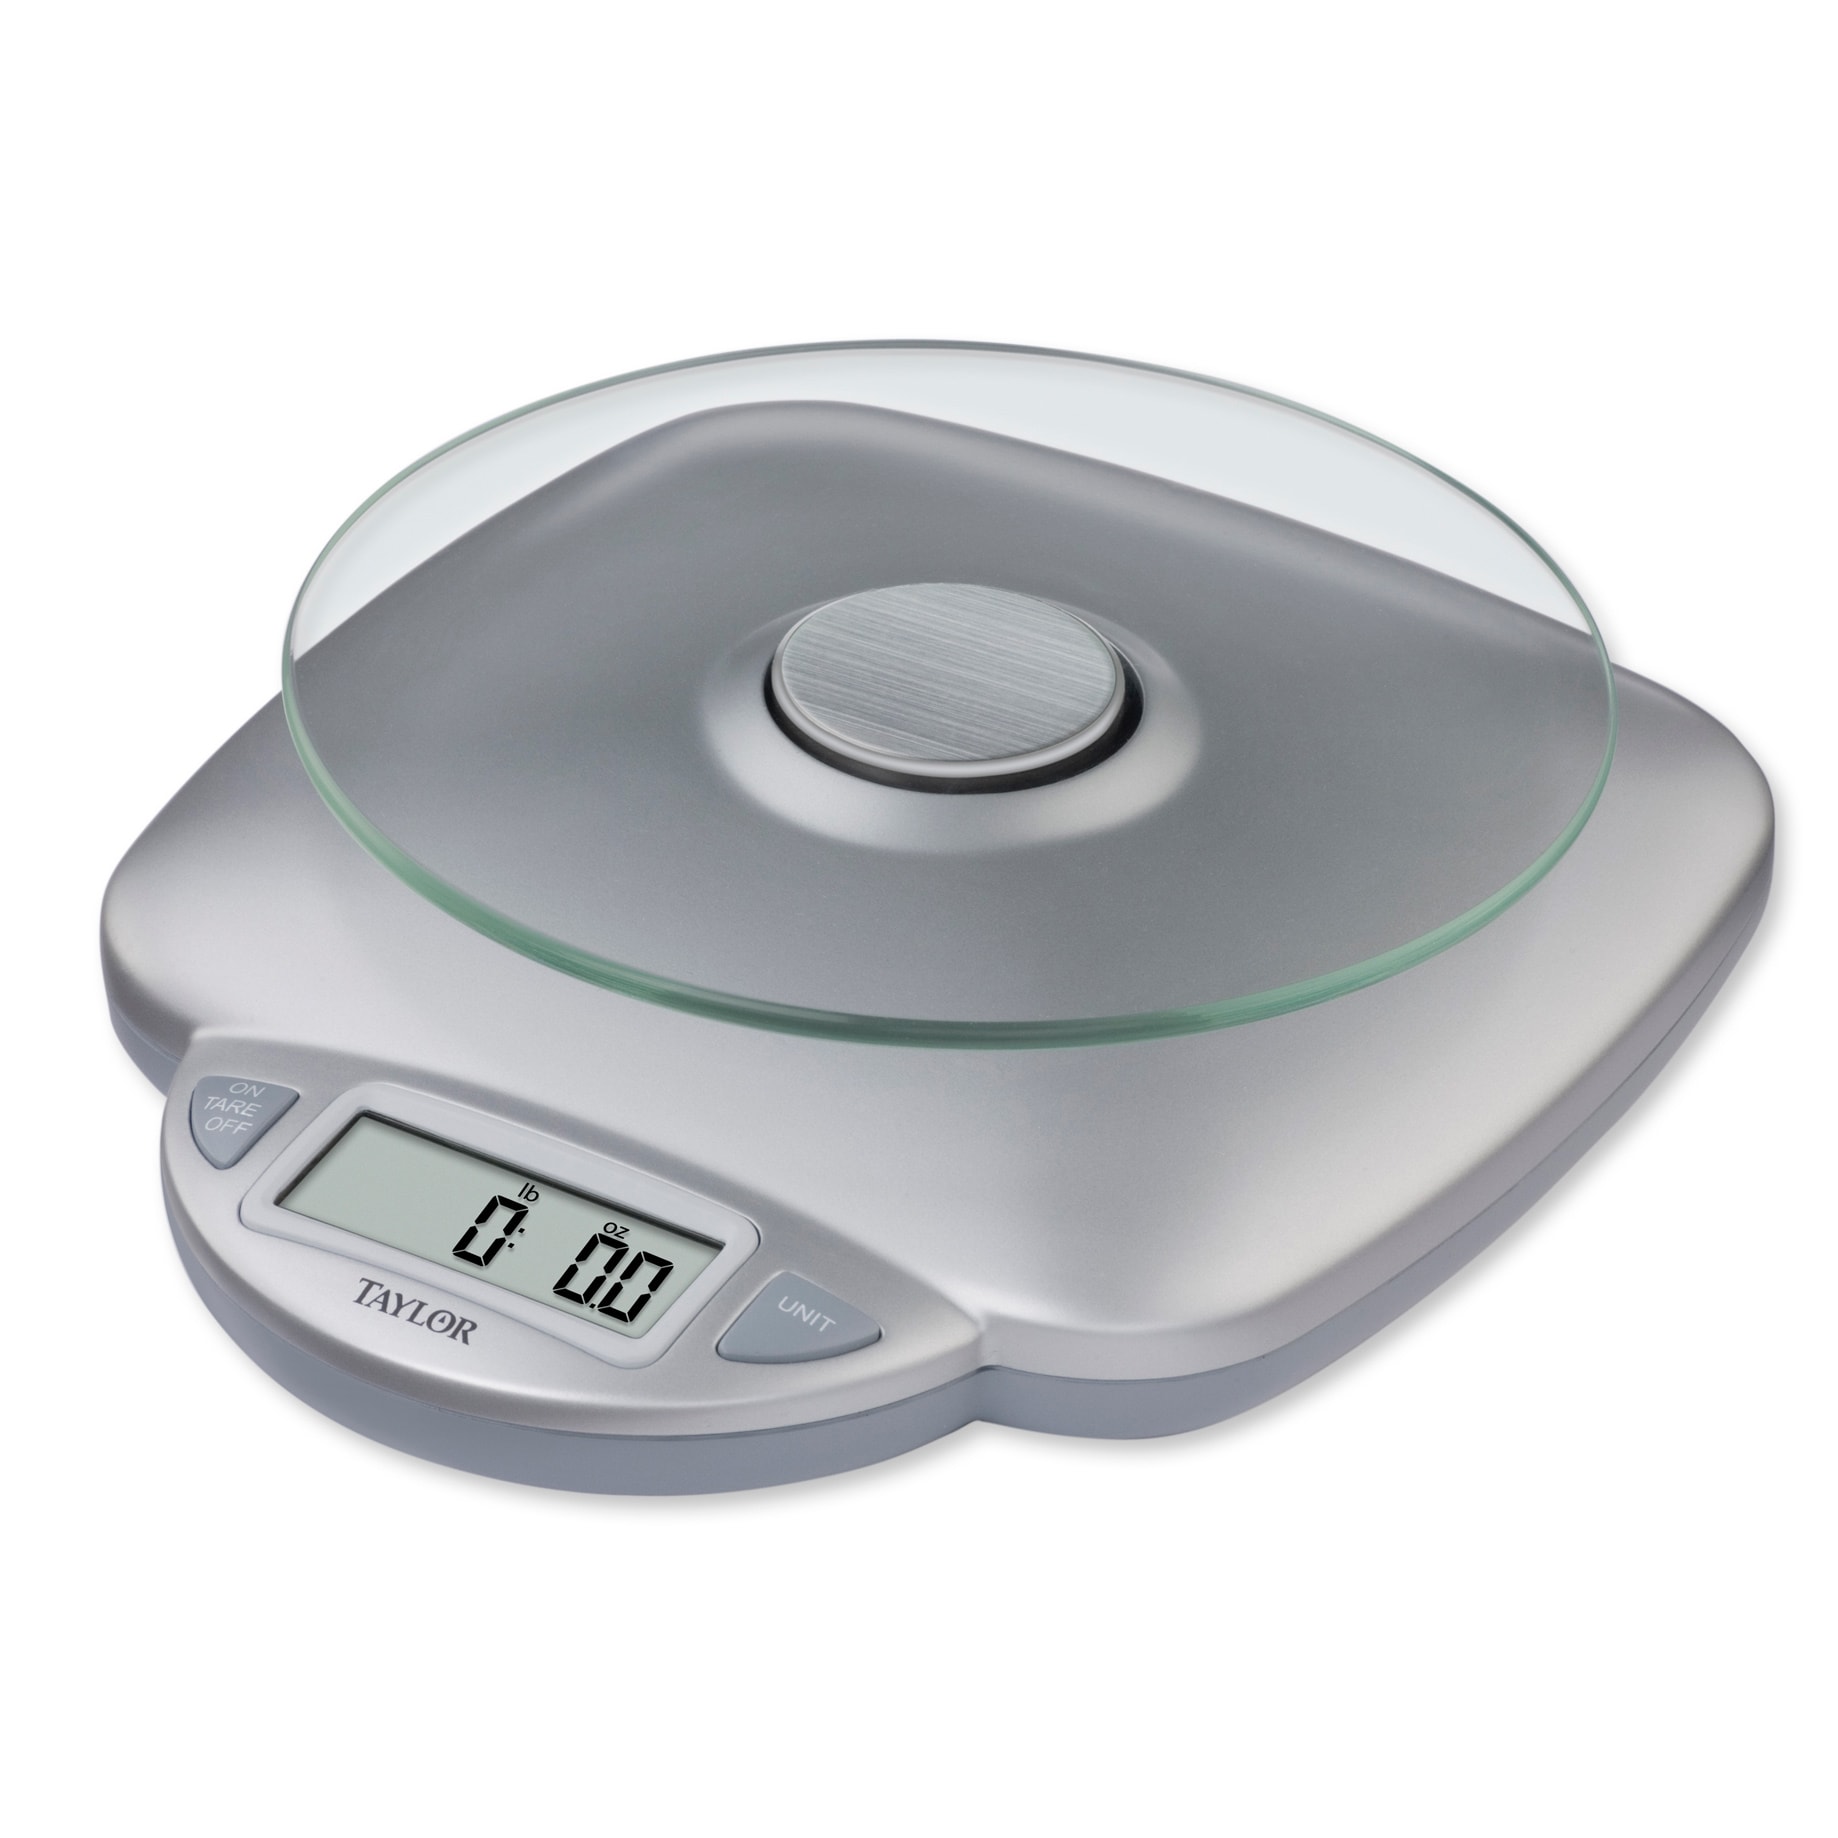 https://ak1.ostkcdn.com/images/products/7717956/7717956/Taylor-Silver-Glass-Digital-Kitchen-Scale-L15122000.jpg